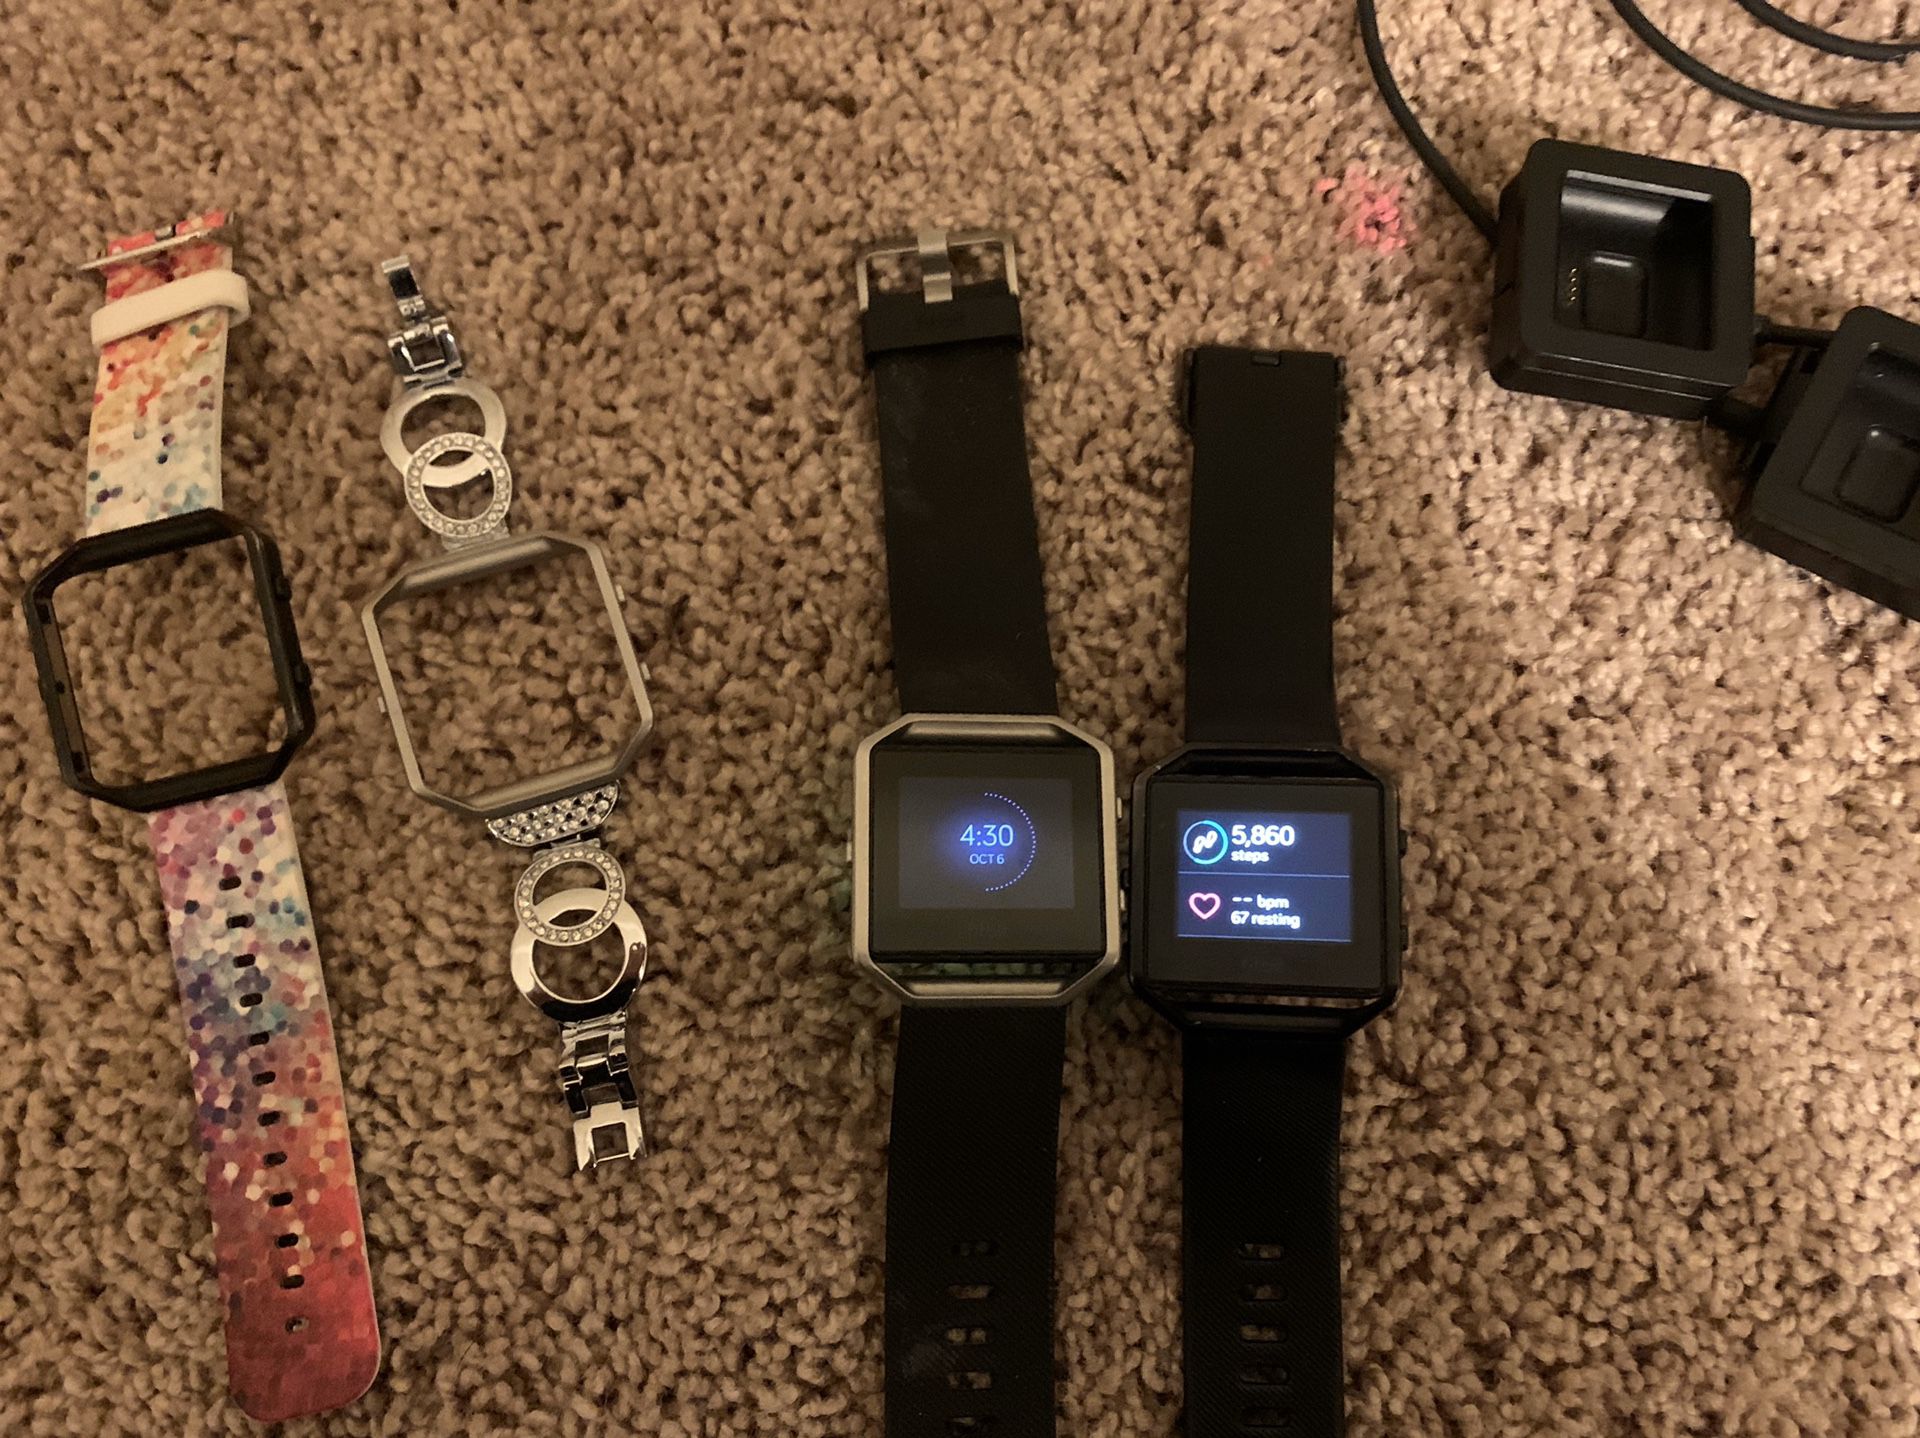 2 Fitbit Blaze watches and extras